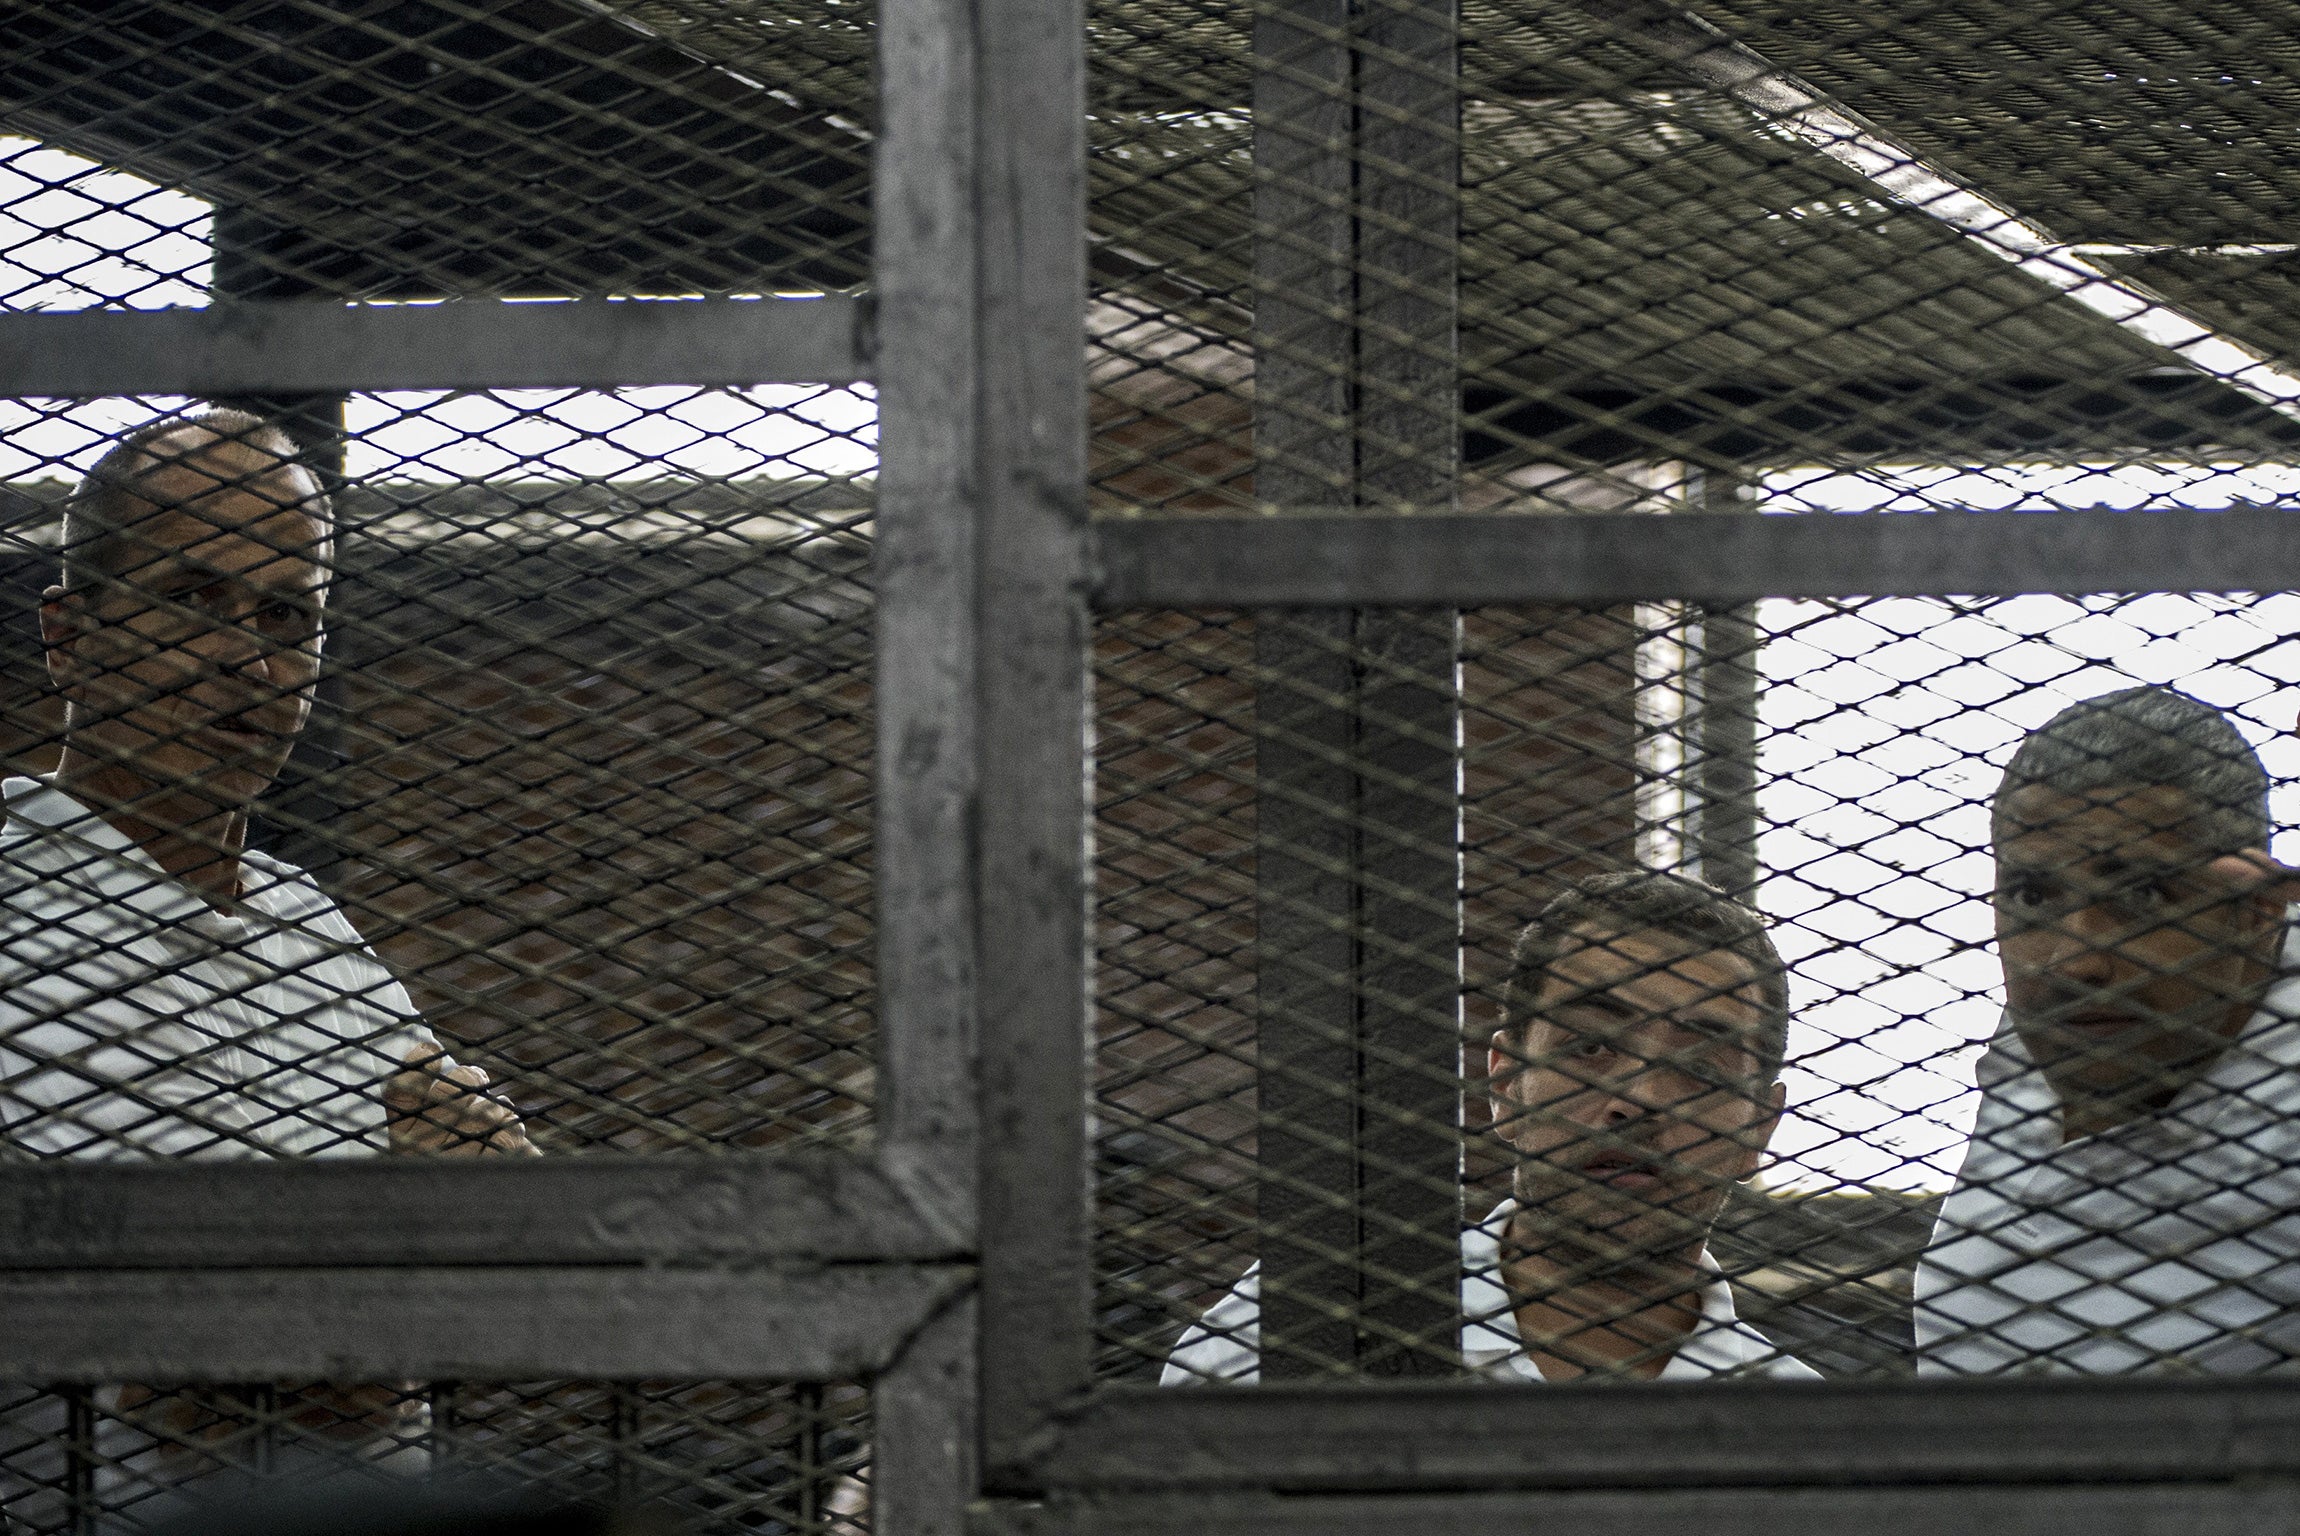 Peter Greste (left) and Mohamed Fahmy flank Baher Mohamed during their initial trial in June 2014 for ‘supporting the Muslim Brotherhood’